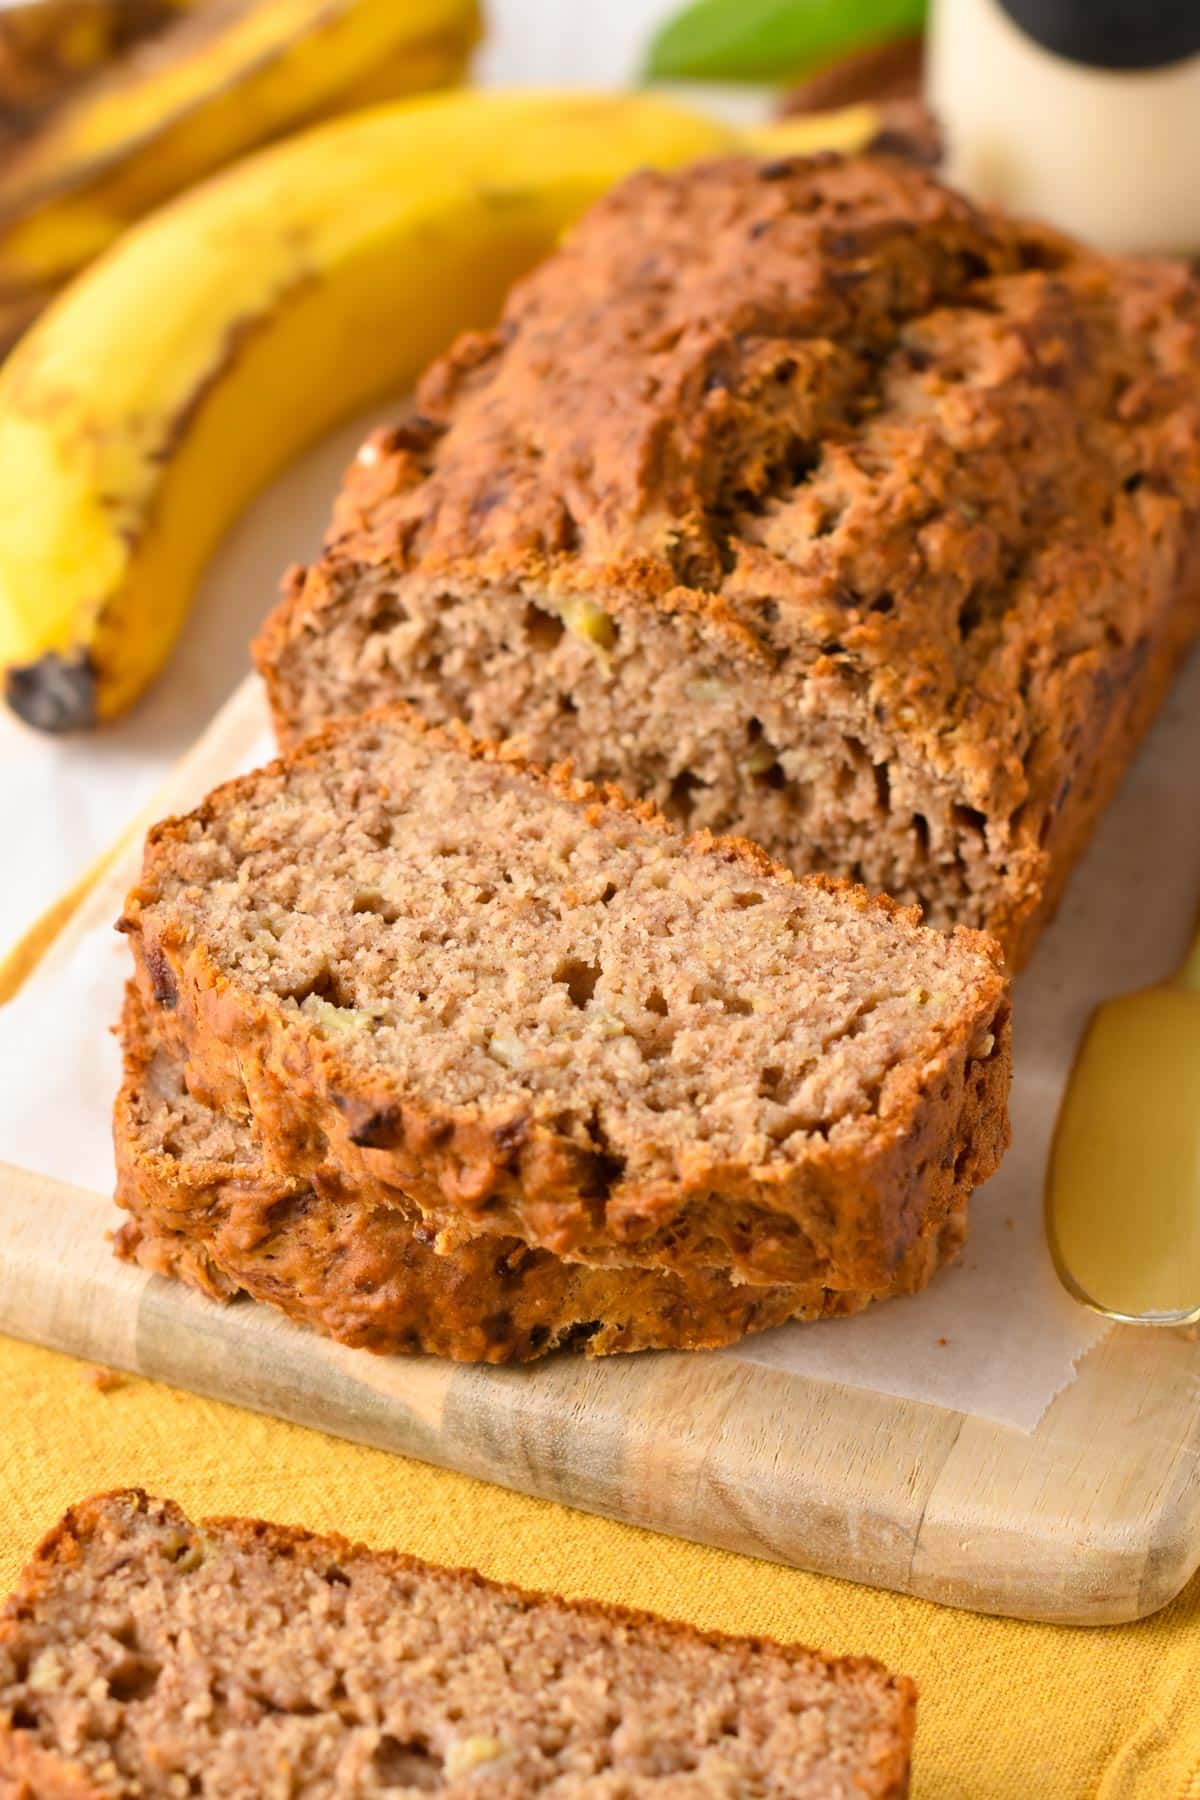 This No Sugar Added Banana Bread is simply the most simple, healthy banana bread recipe ever! If you have ripe bananas sitting on your kitchen counter, this is the banana bread recipe you need.